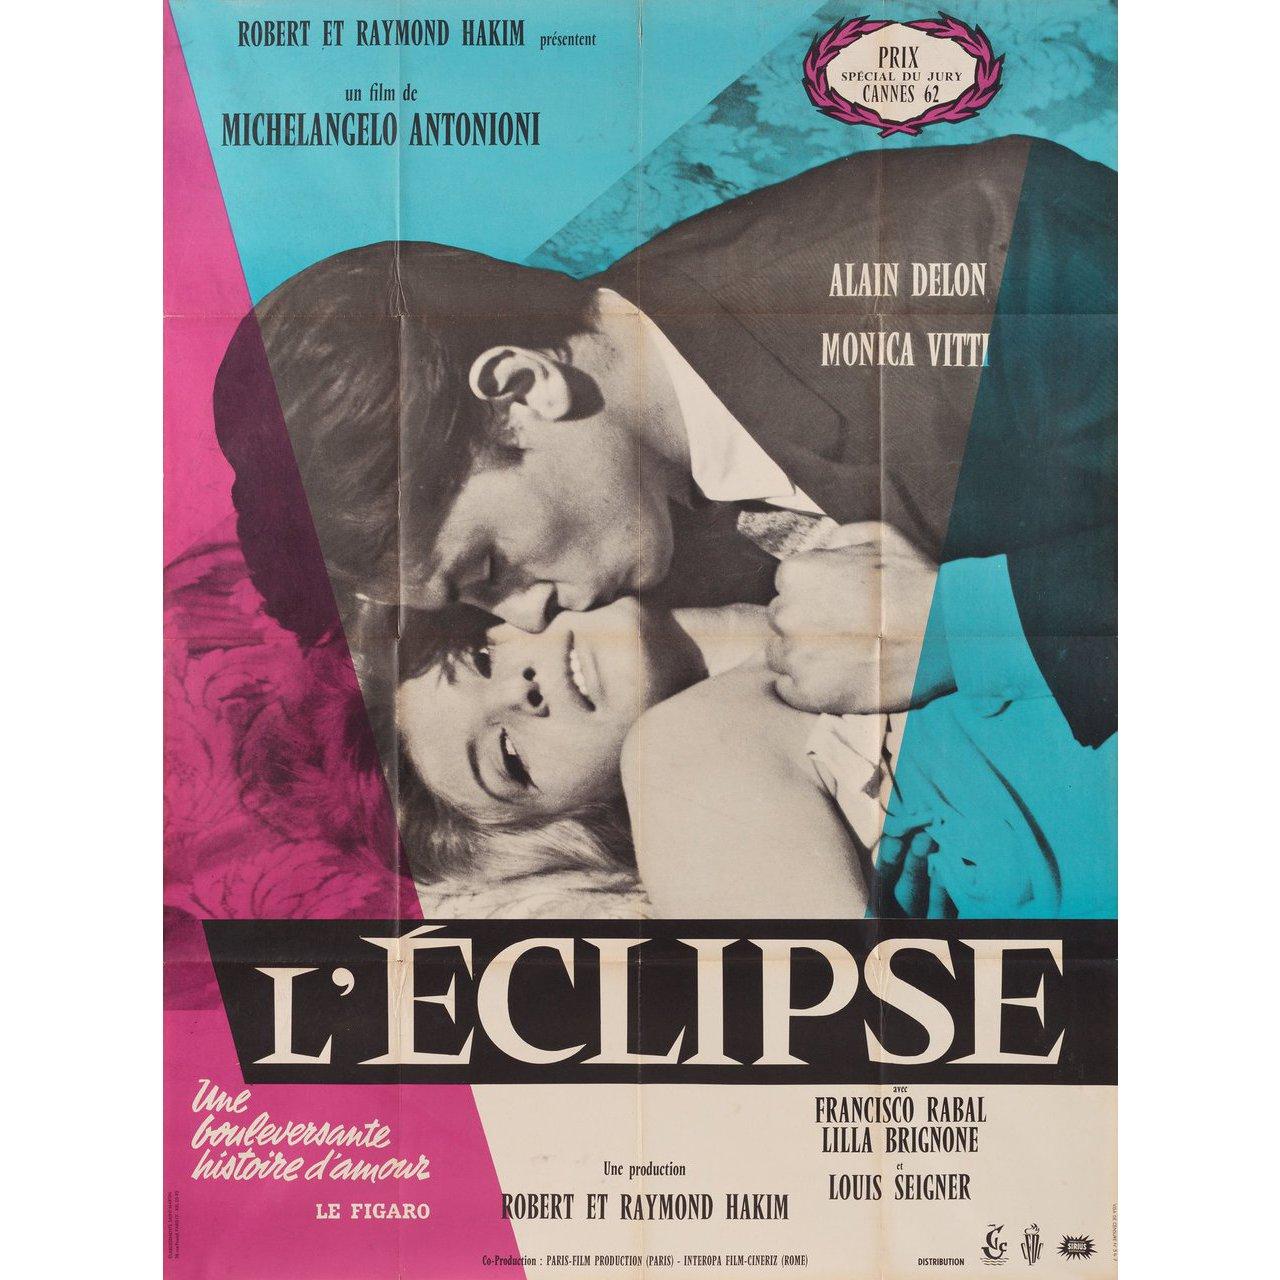 Original 1962 French grande poster for the film L'Eclisse (The Eclipse) directed by Michelangelo Antonioni with Alain Delon / Monica Vitti / Francisco Rabal / Lilla Brignone. Very Good-Fine condition, folded. Many original posters were issued folded